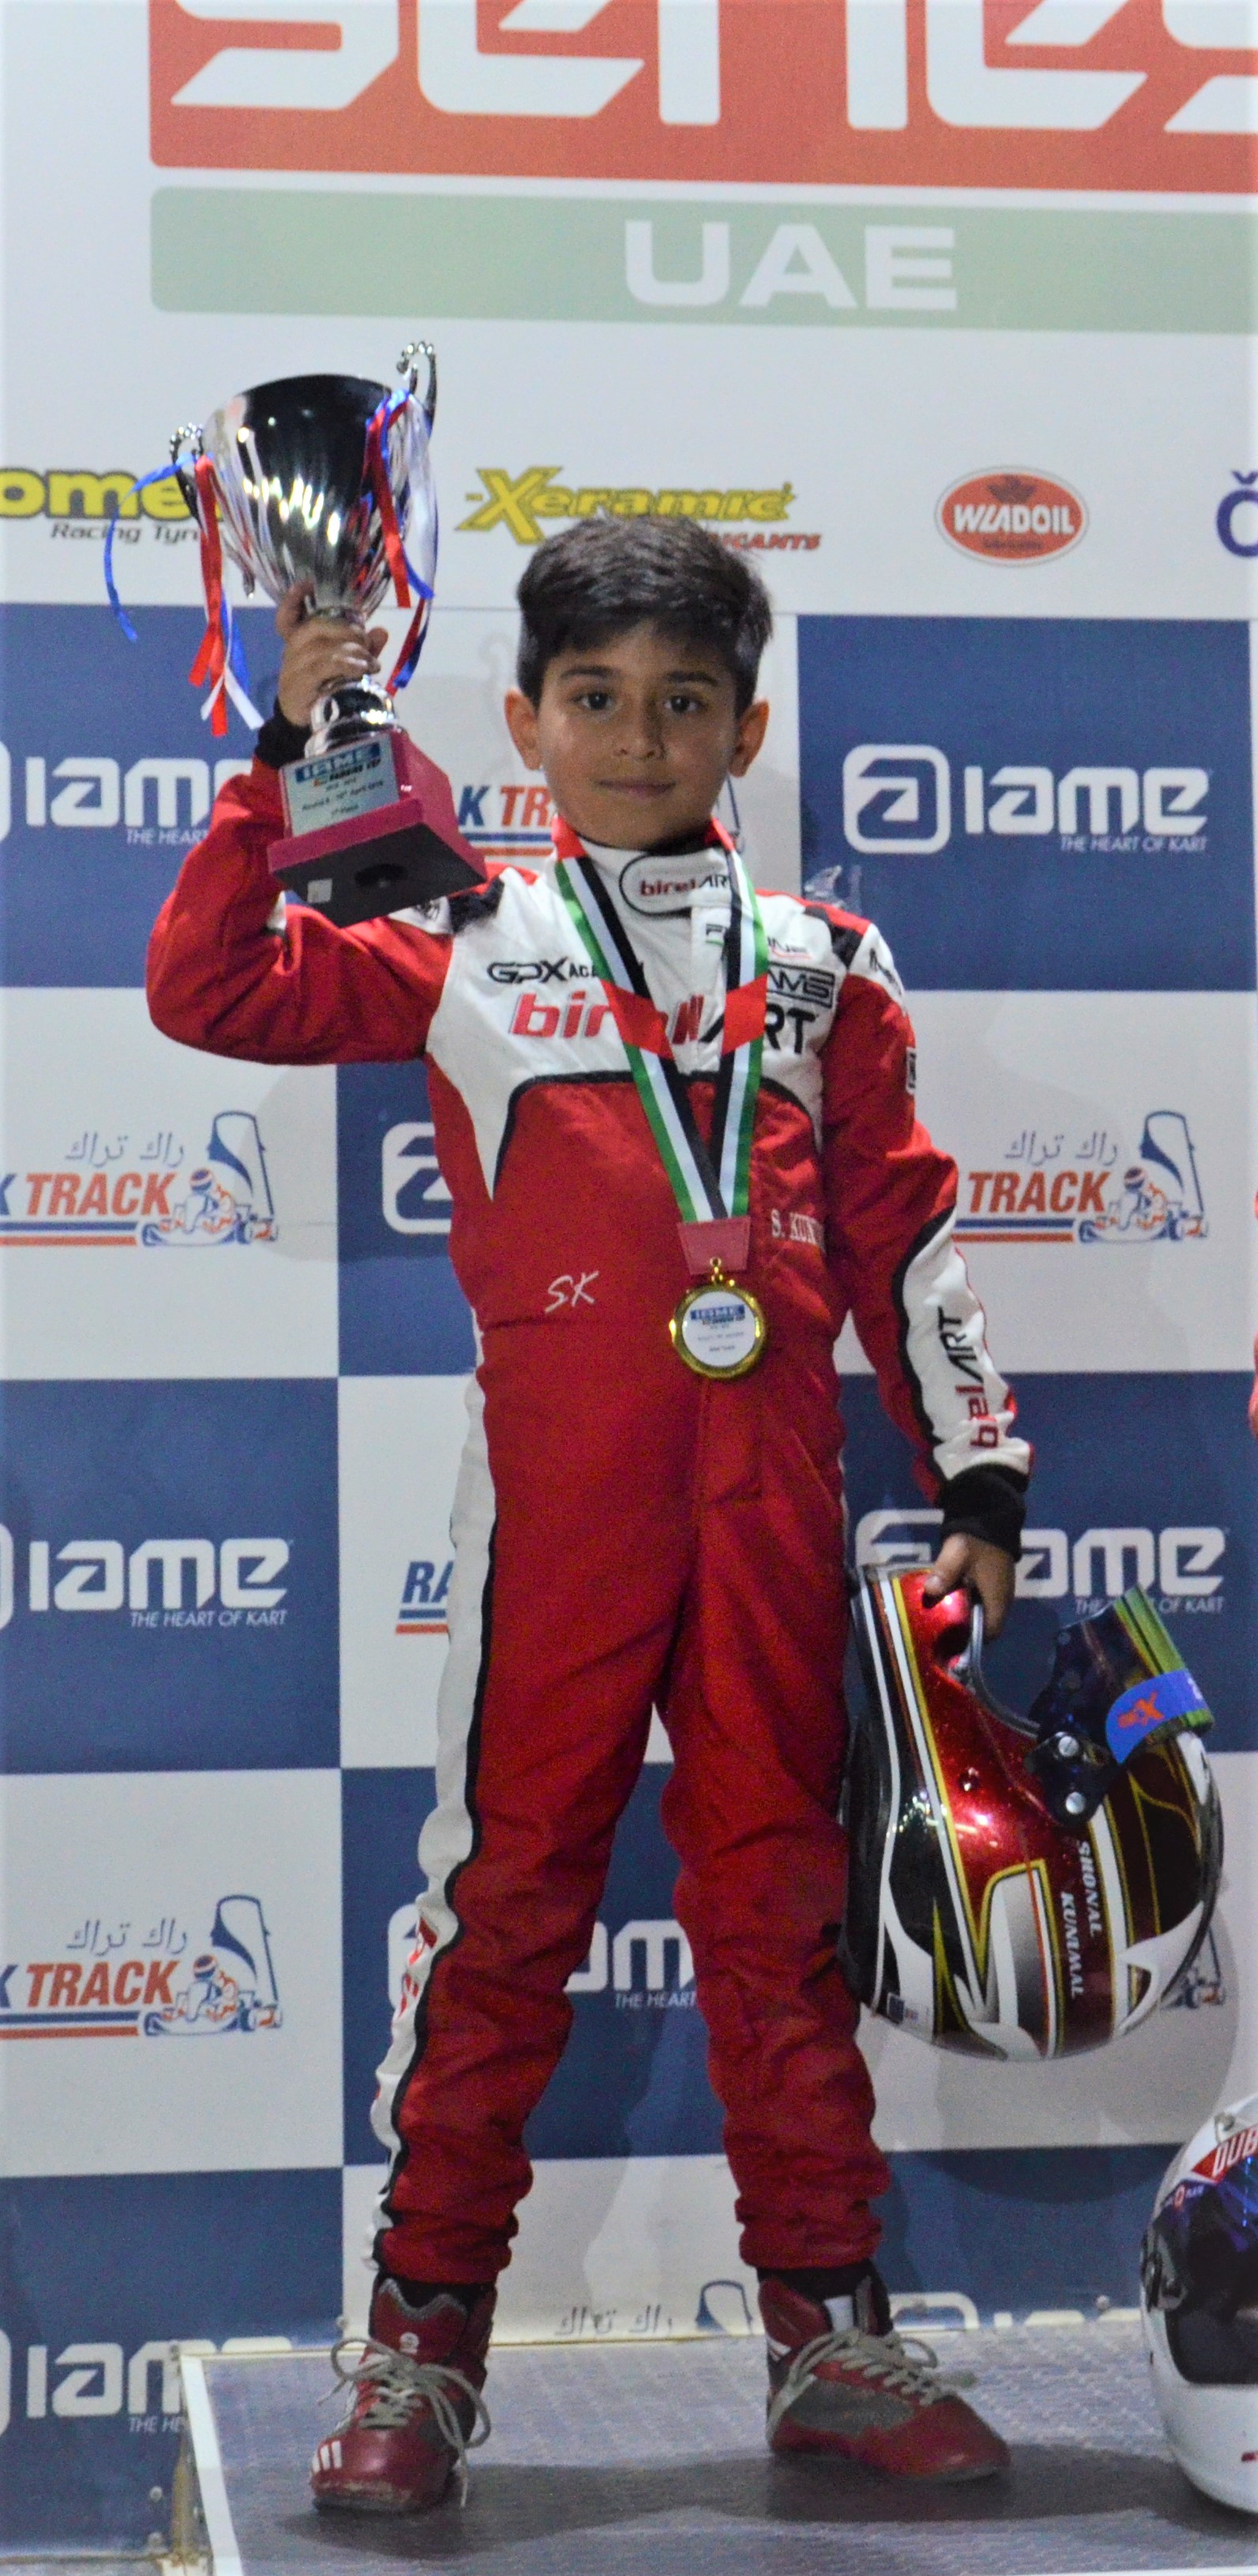 Seven-year-old from Oman becomes go-karting champion in UAE